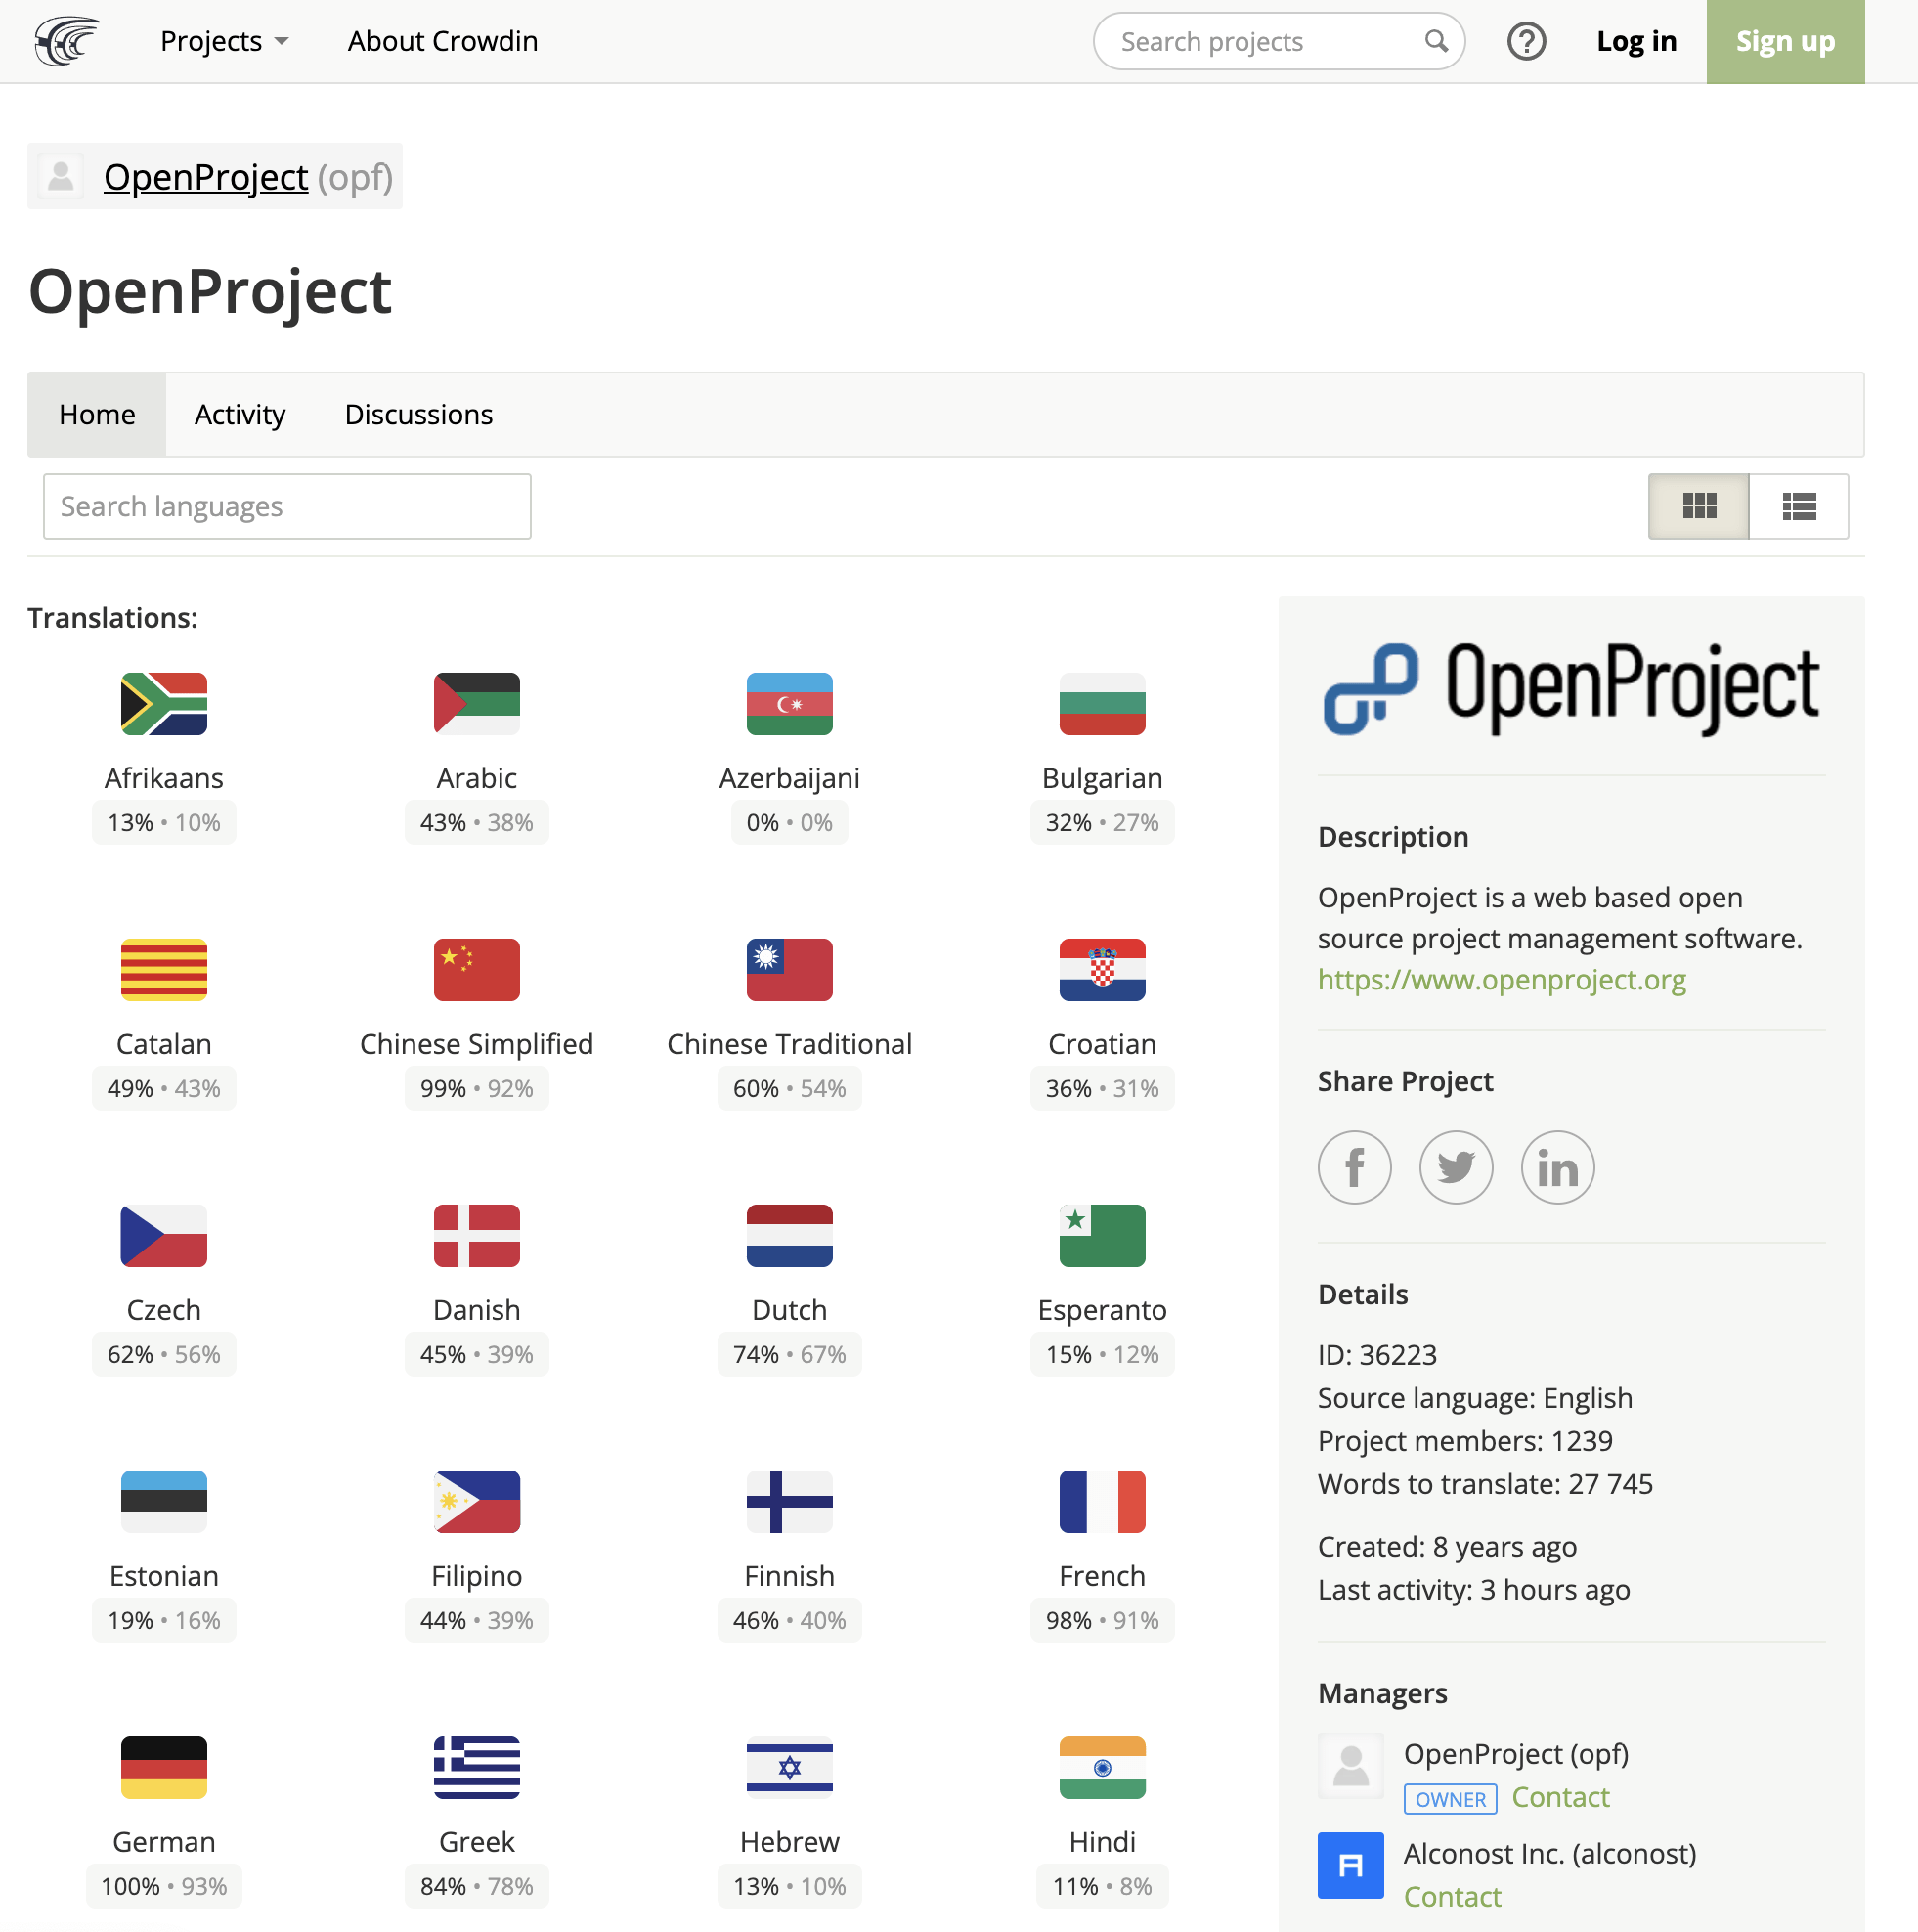 Language overview in OpenProject CrowdIn project